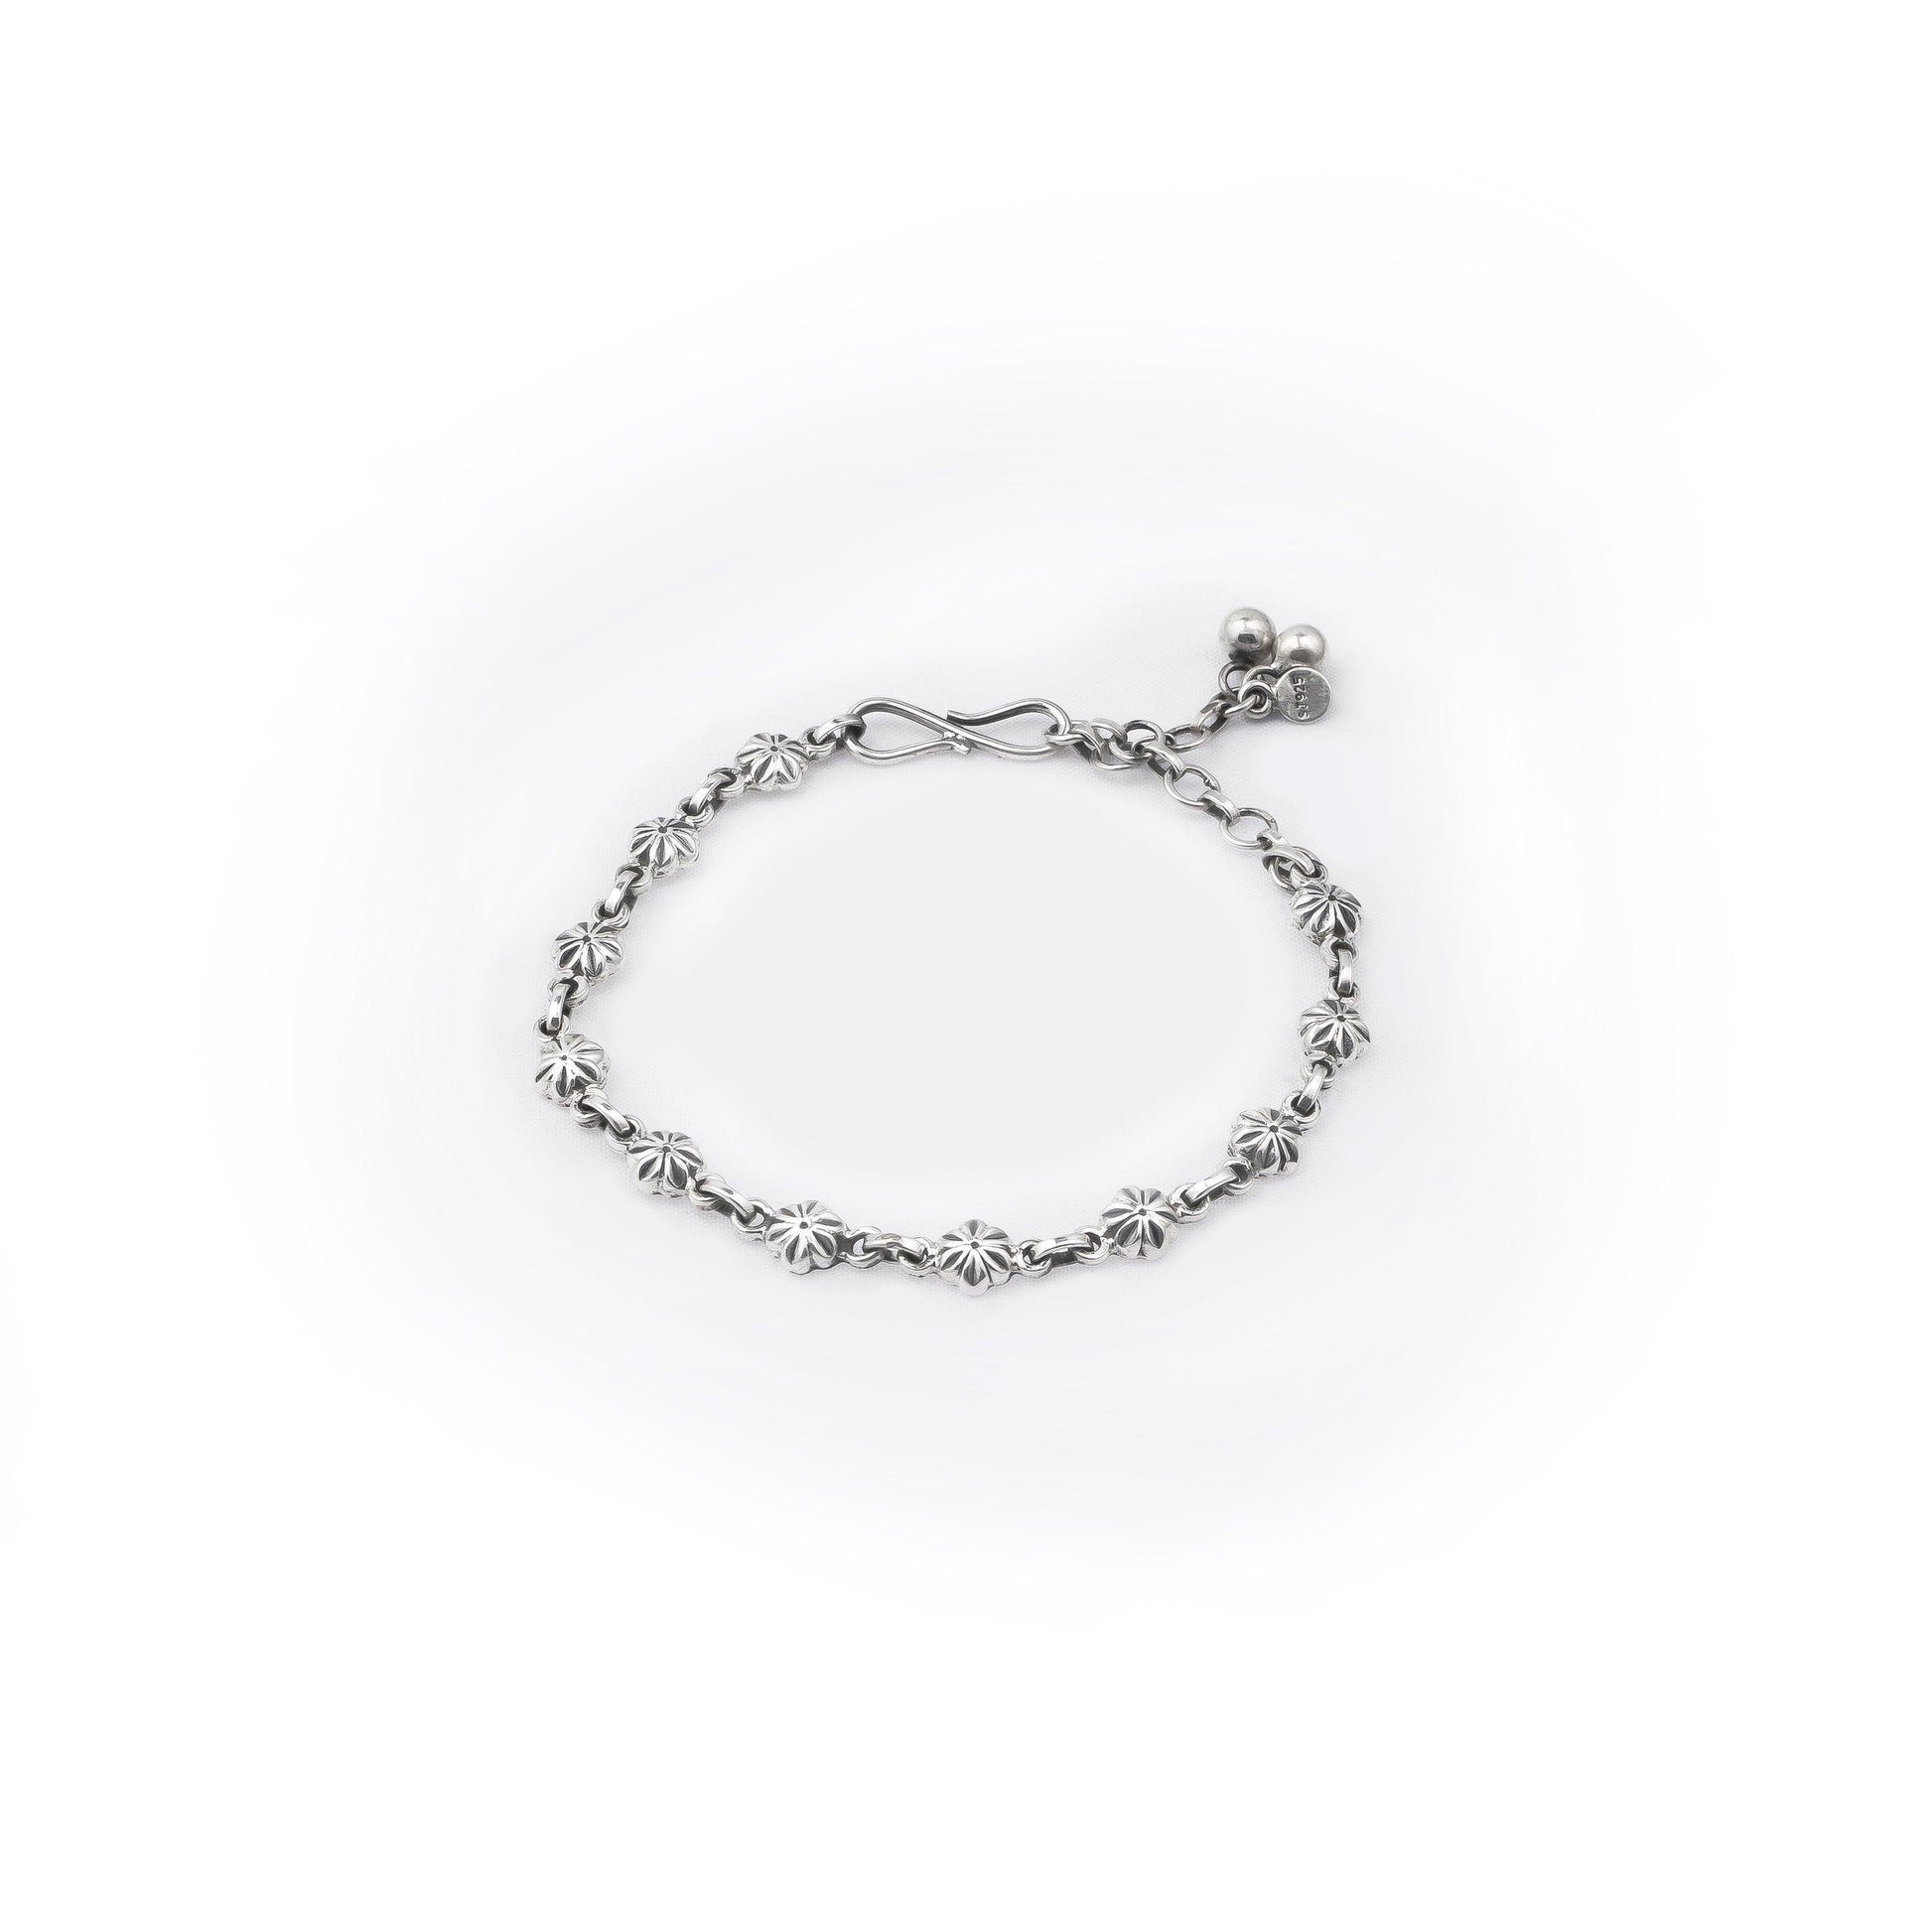 Garland Anklet - Smith Jewels